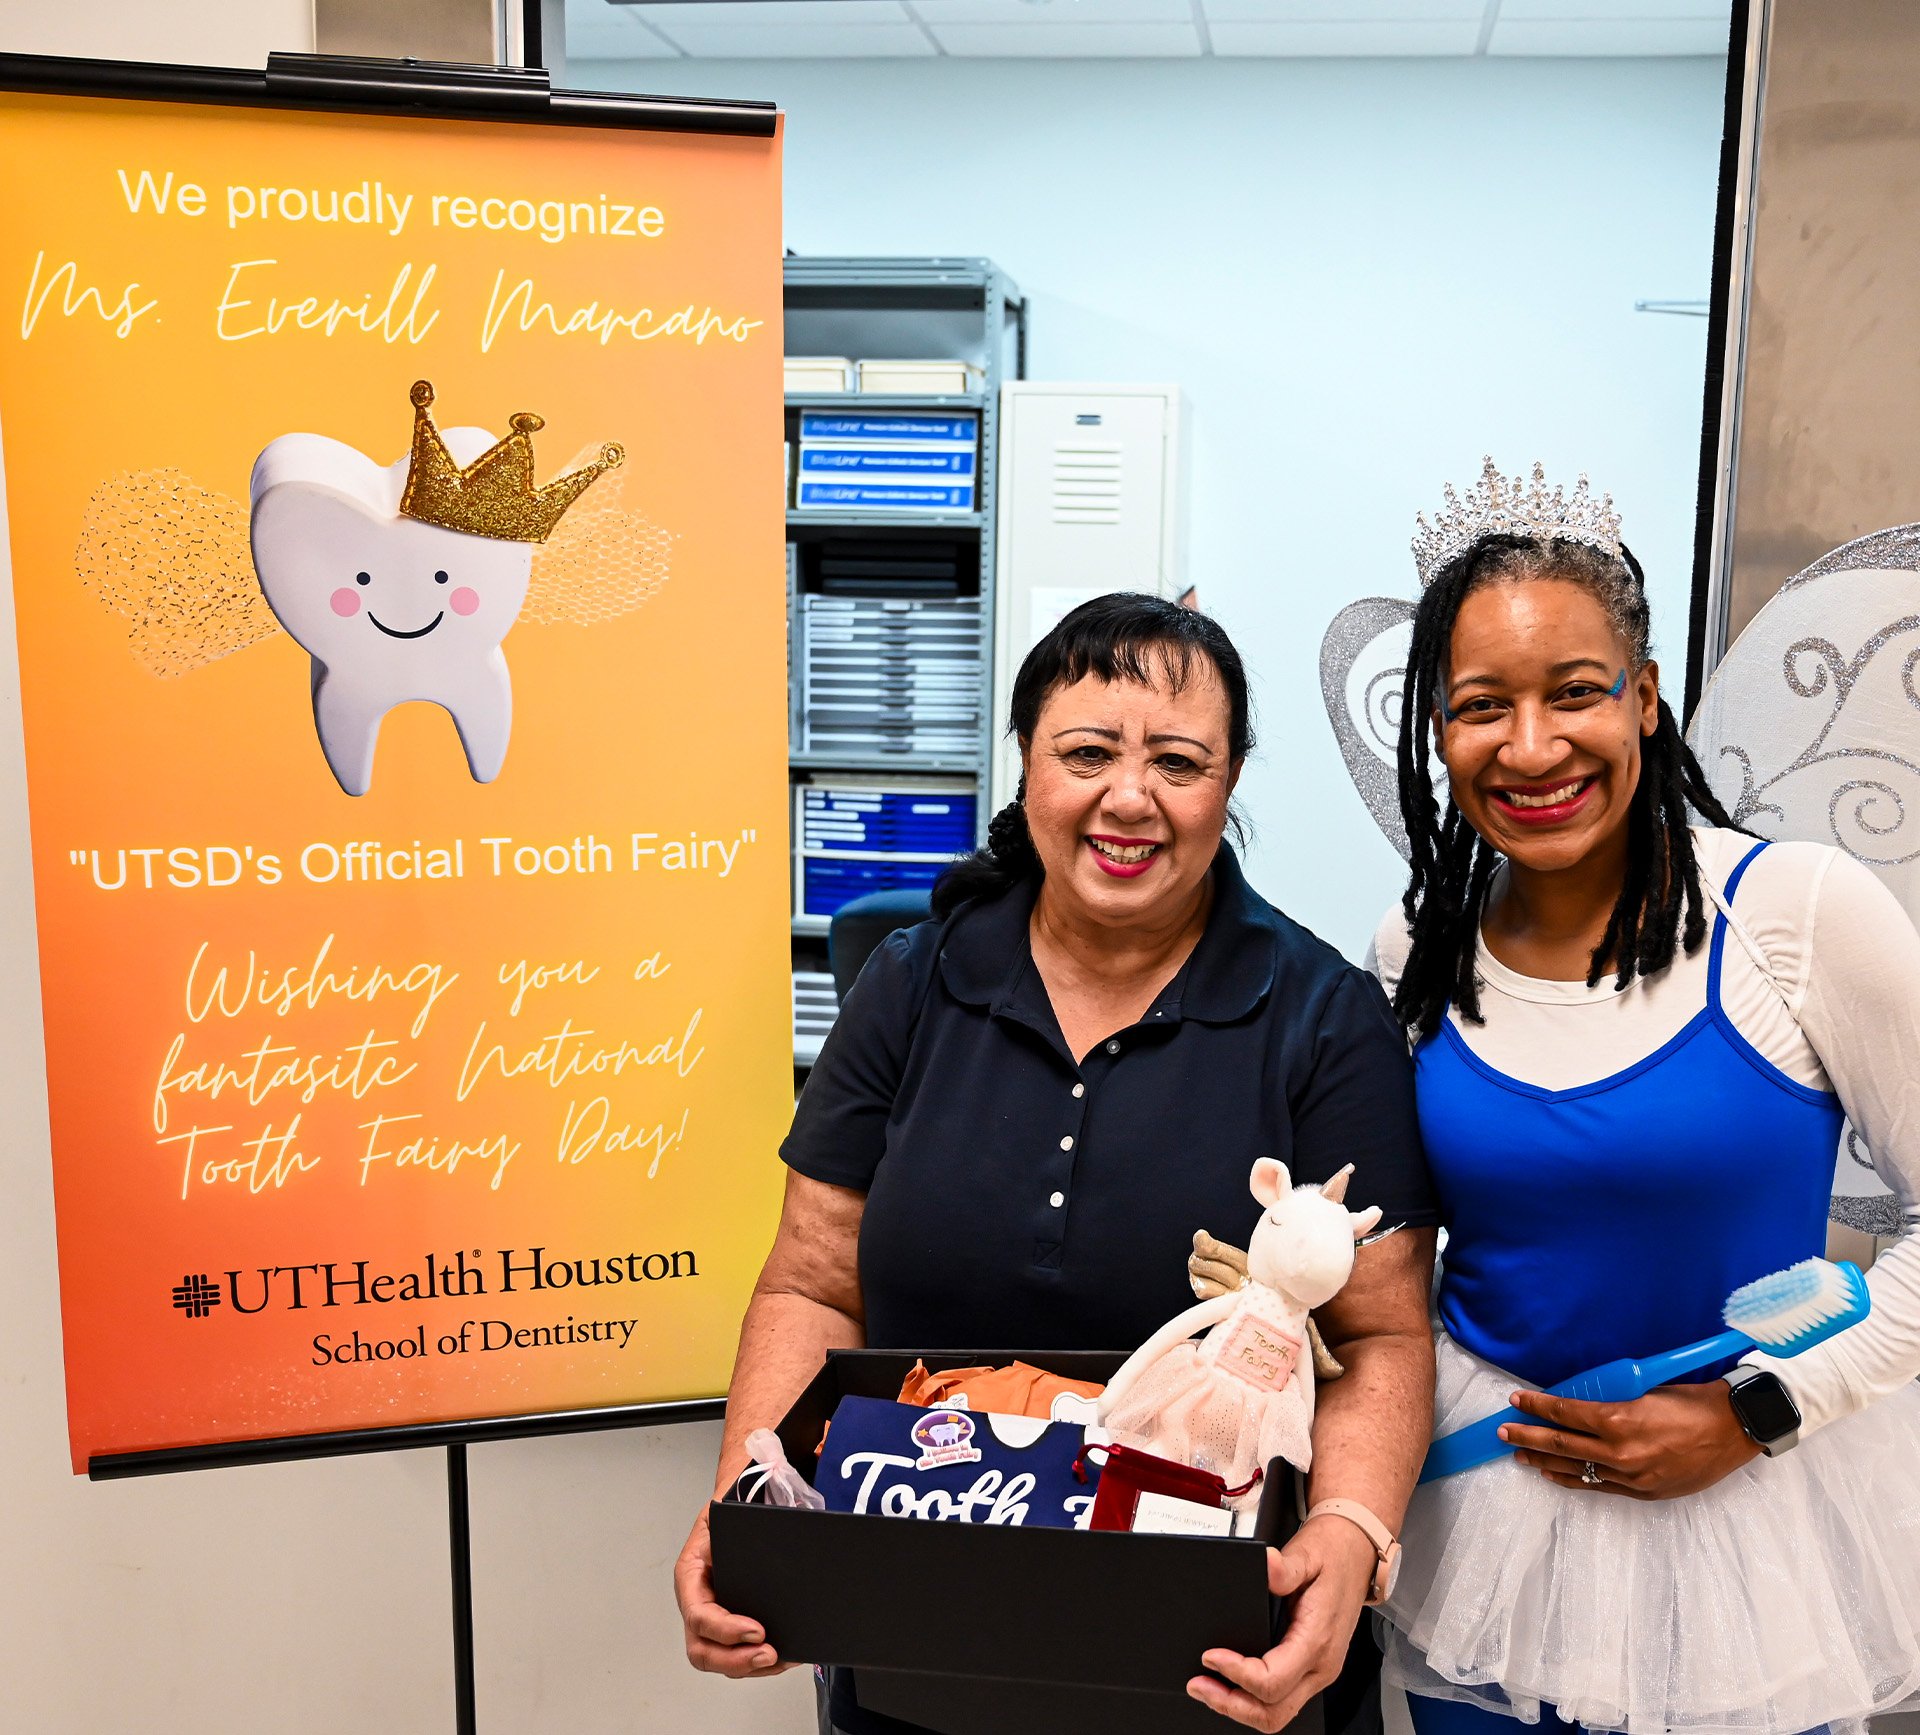 Everill Marcano (left), senior dental dispensaries assistant in the Tooth Room, was visited by the Tooth Fairy on National Tooth Fairy Day.